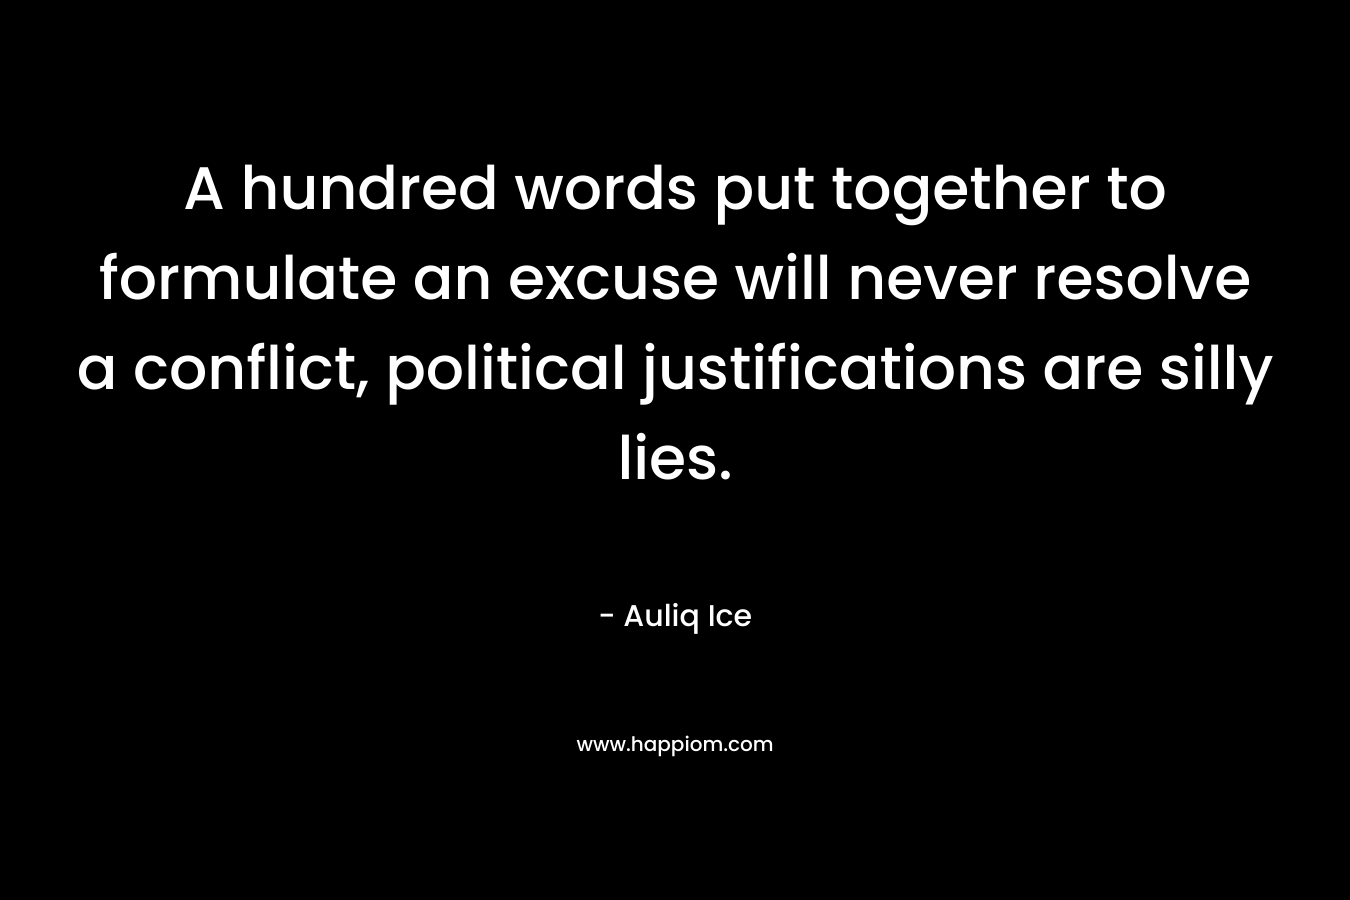 A hundred words put together to formulate an excuse will never resolve a conflict, political justifications are silly lies. – Auliq Ice